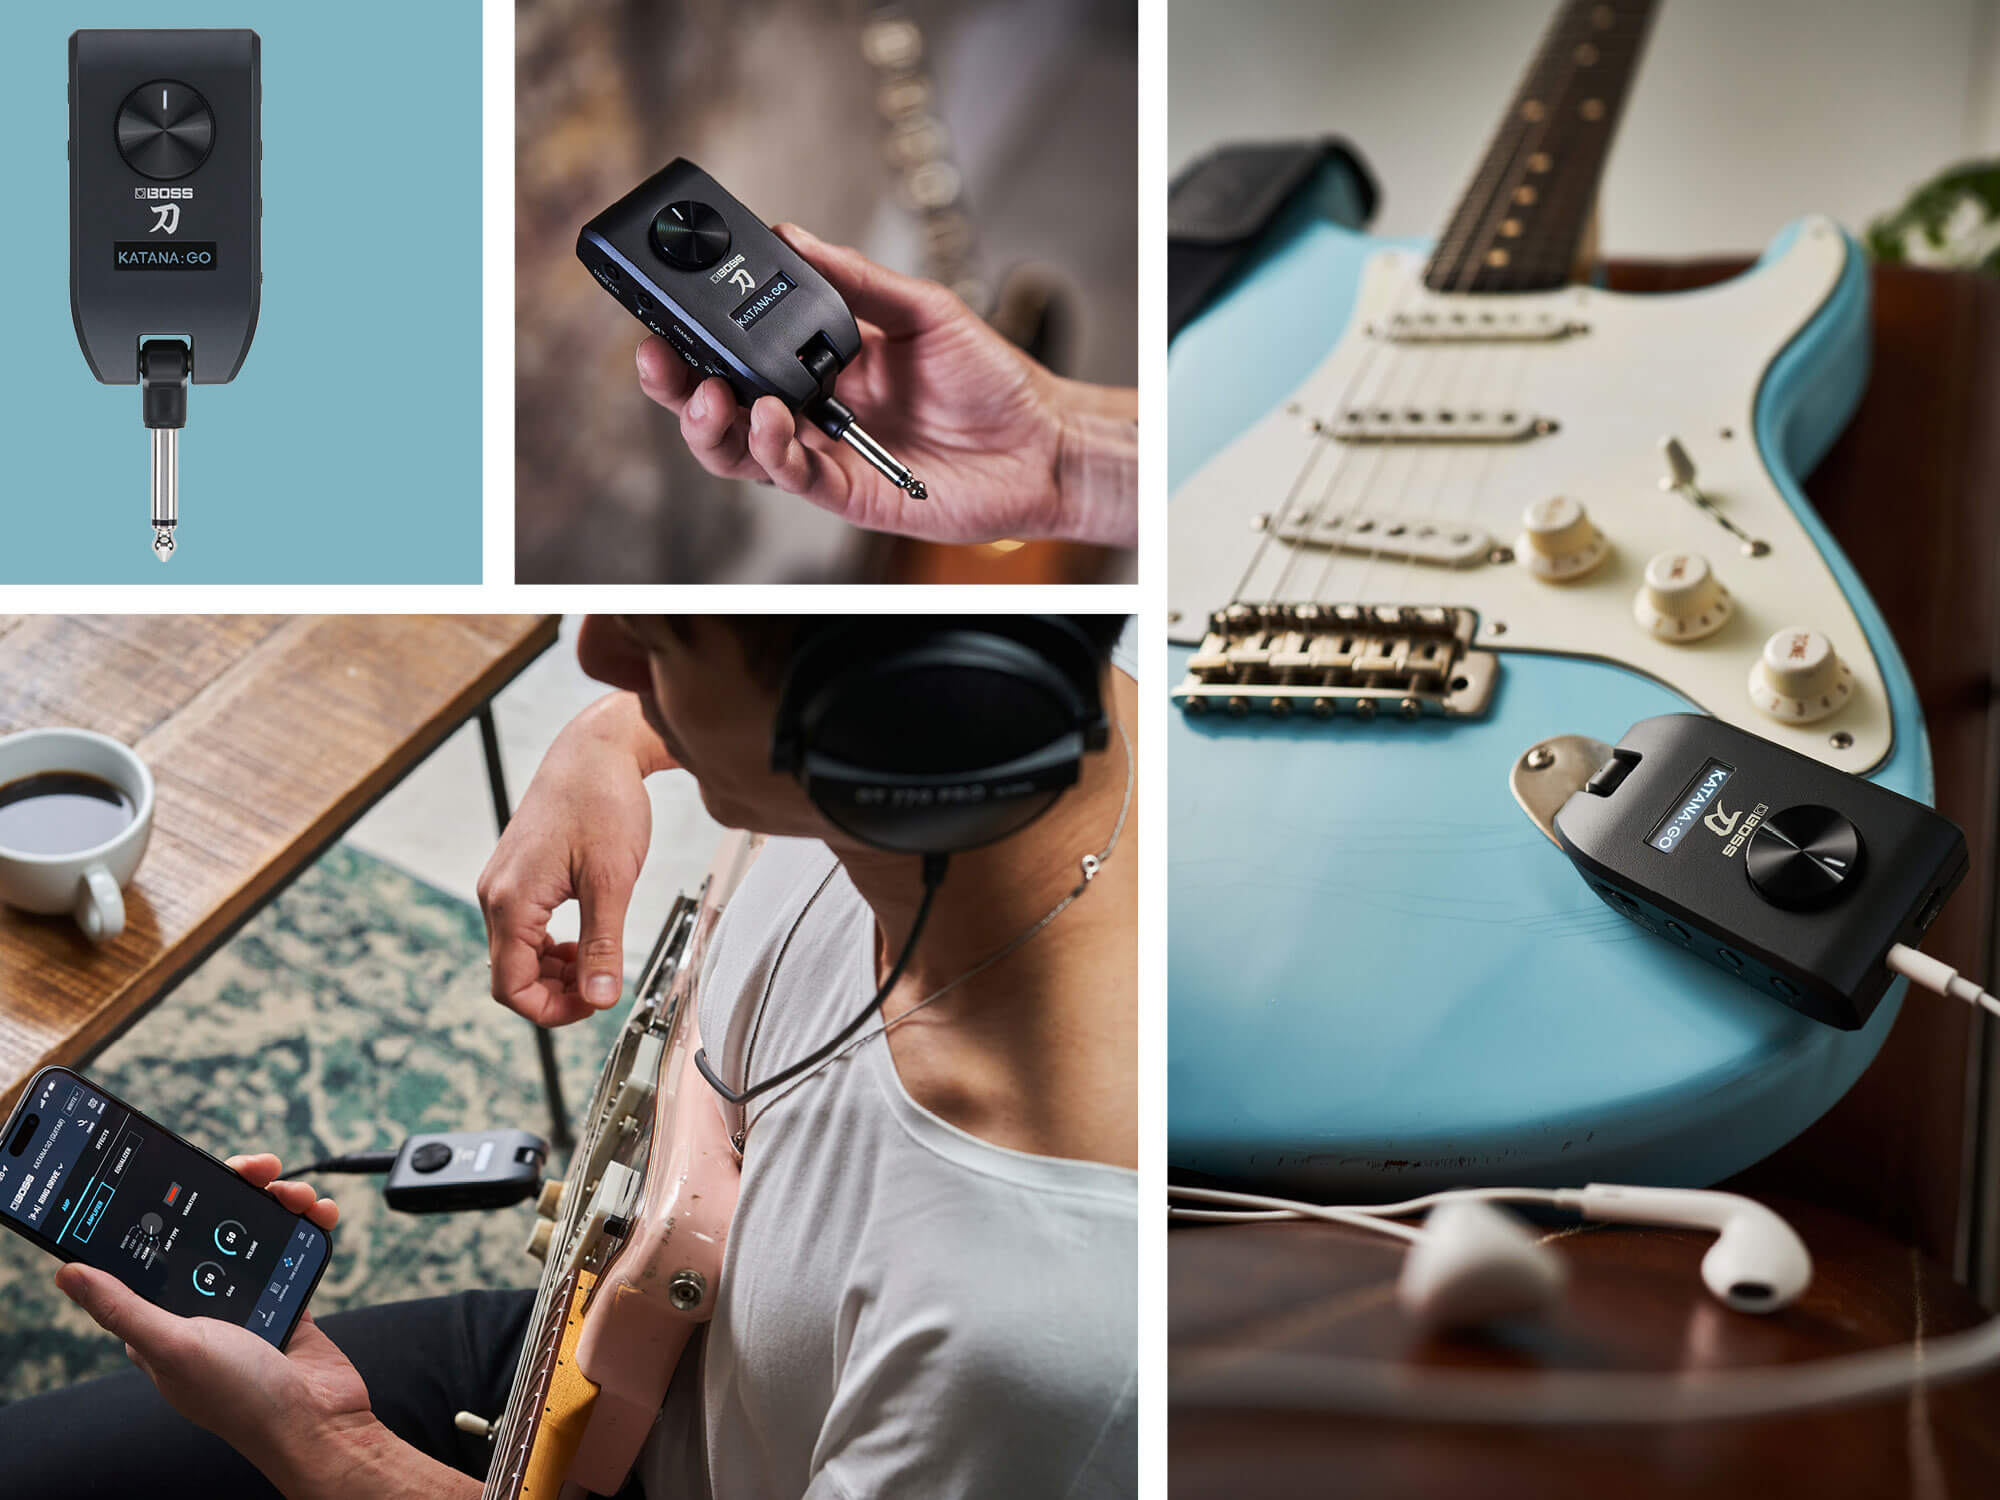 Boss lets you play big riffs on the move with new Katana:Go headphone  guitar amp